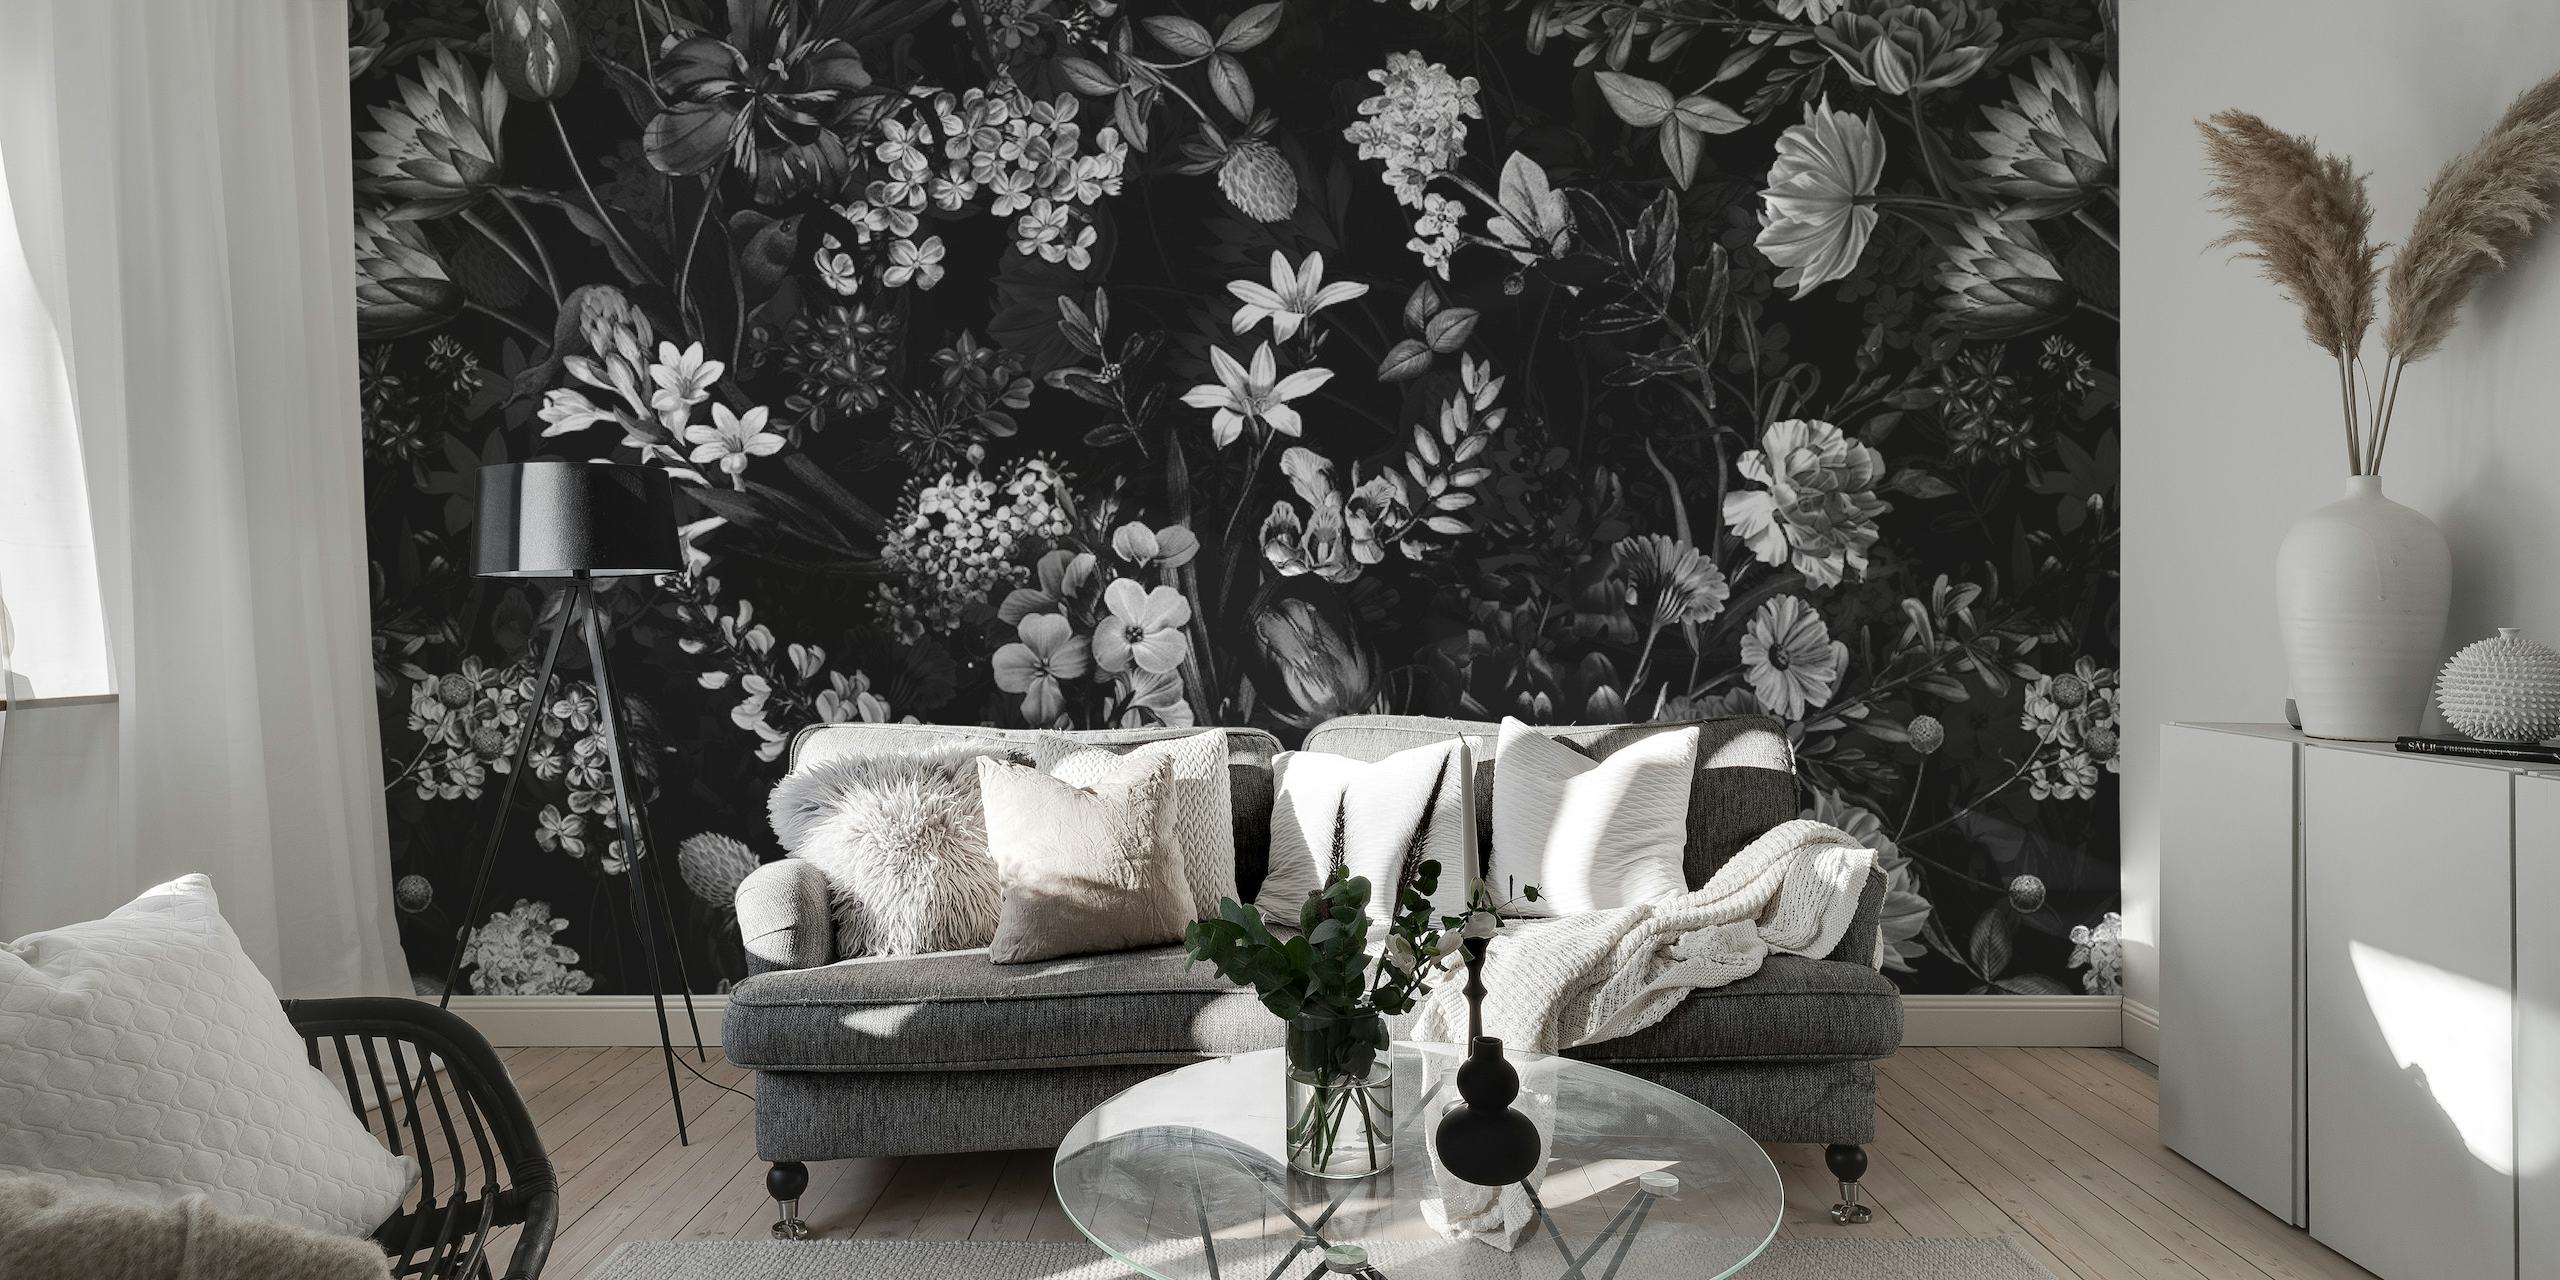 Monochrome floral wall mural with rich, dark tones and intricate nature patterns